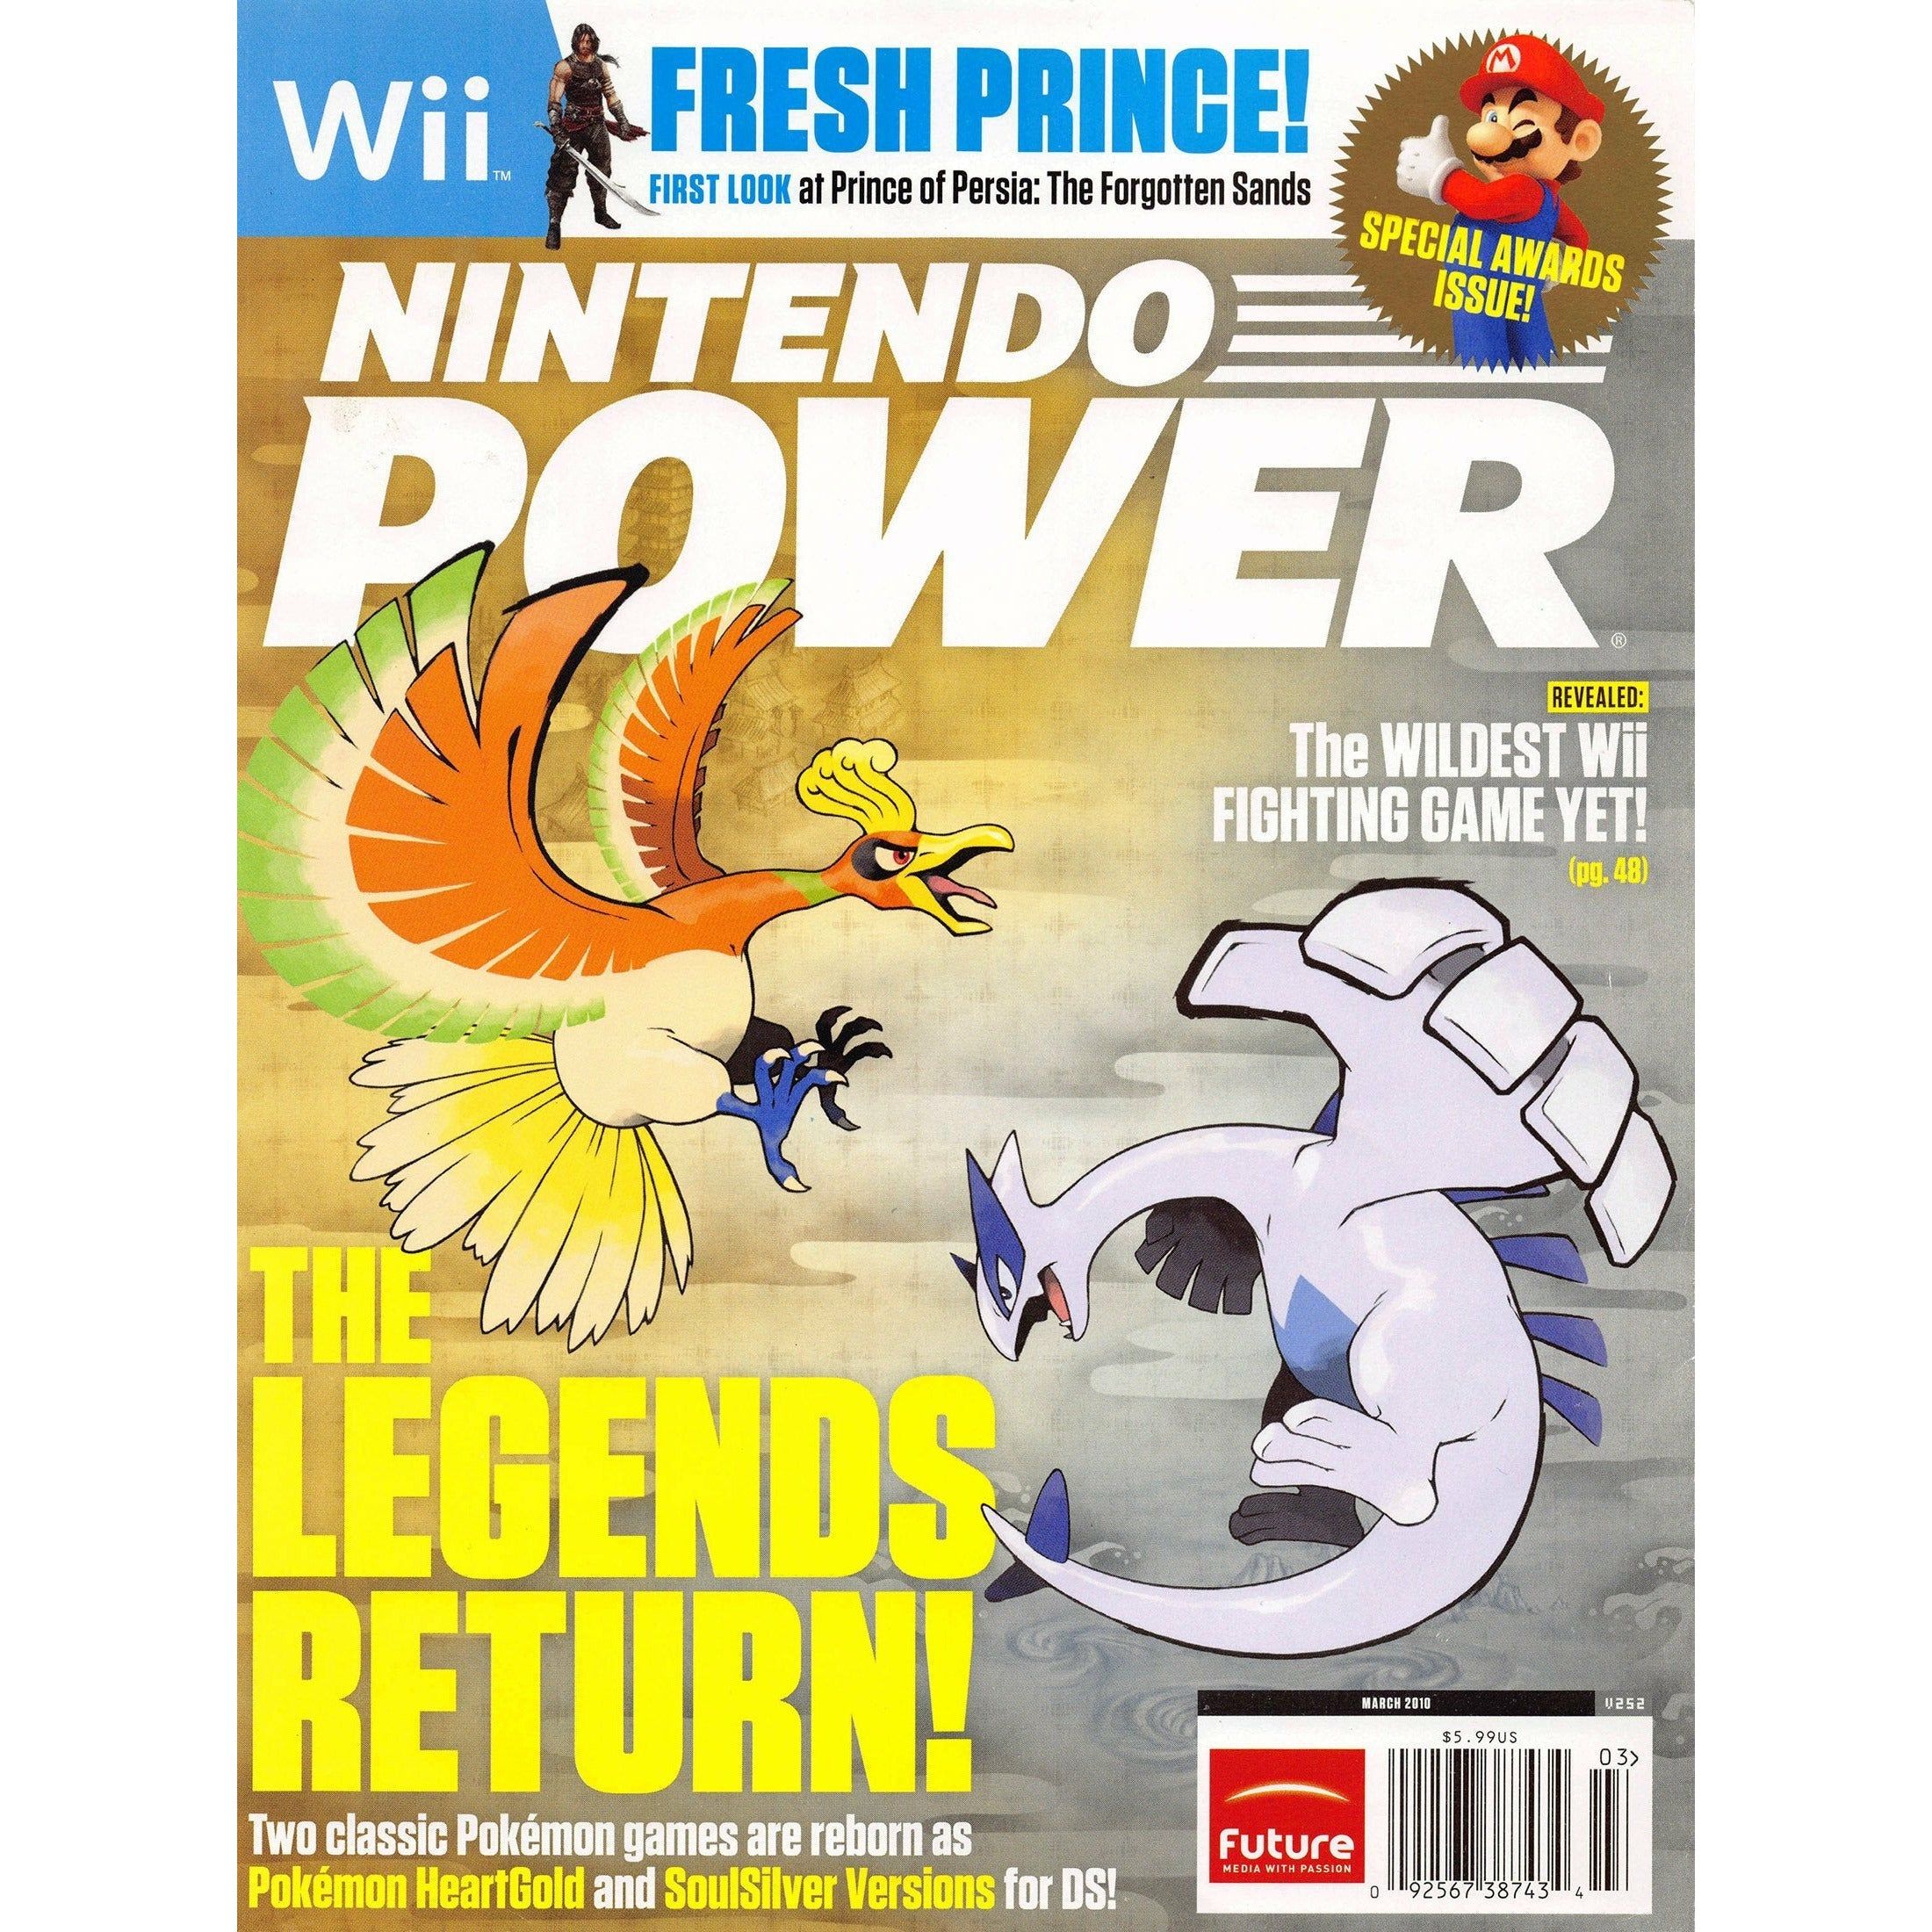 Nintendo Power Magazine (#252 Subscriber Edition) - Complete and/or Good Condition